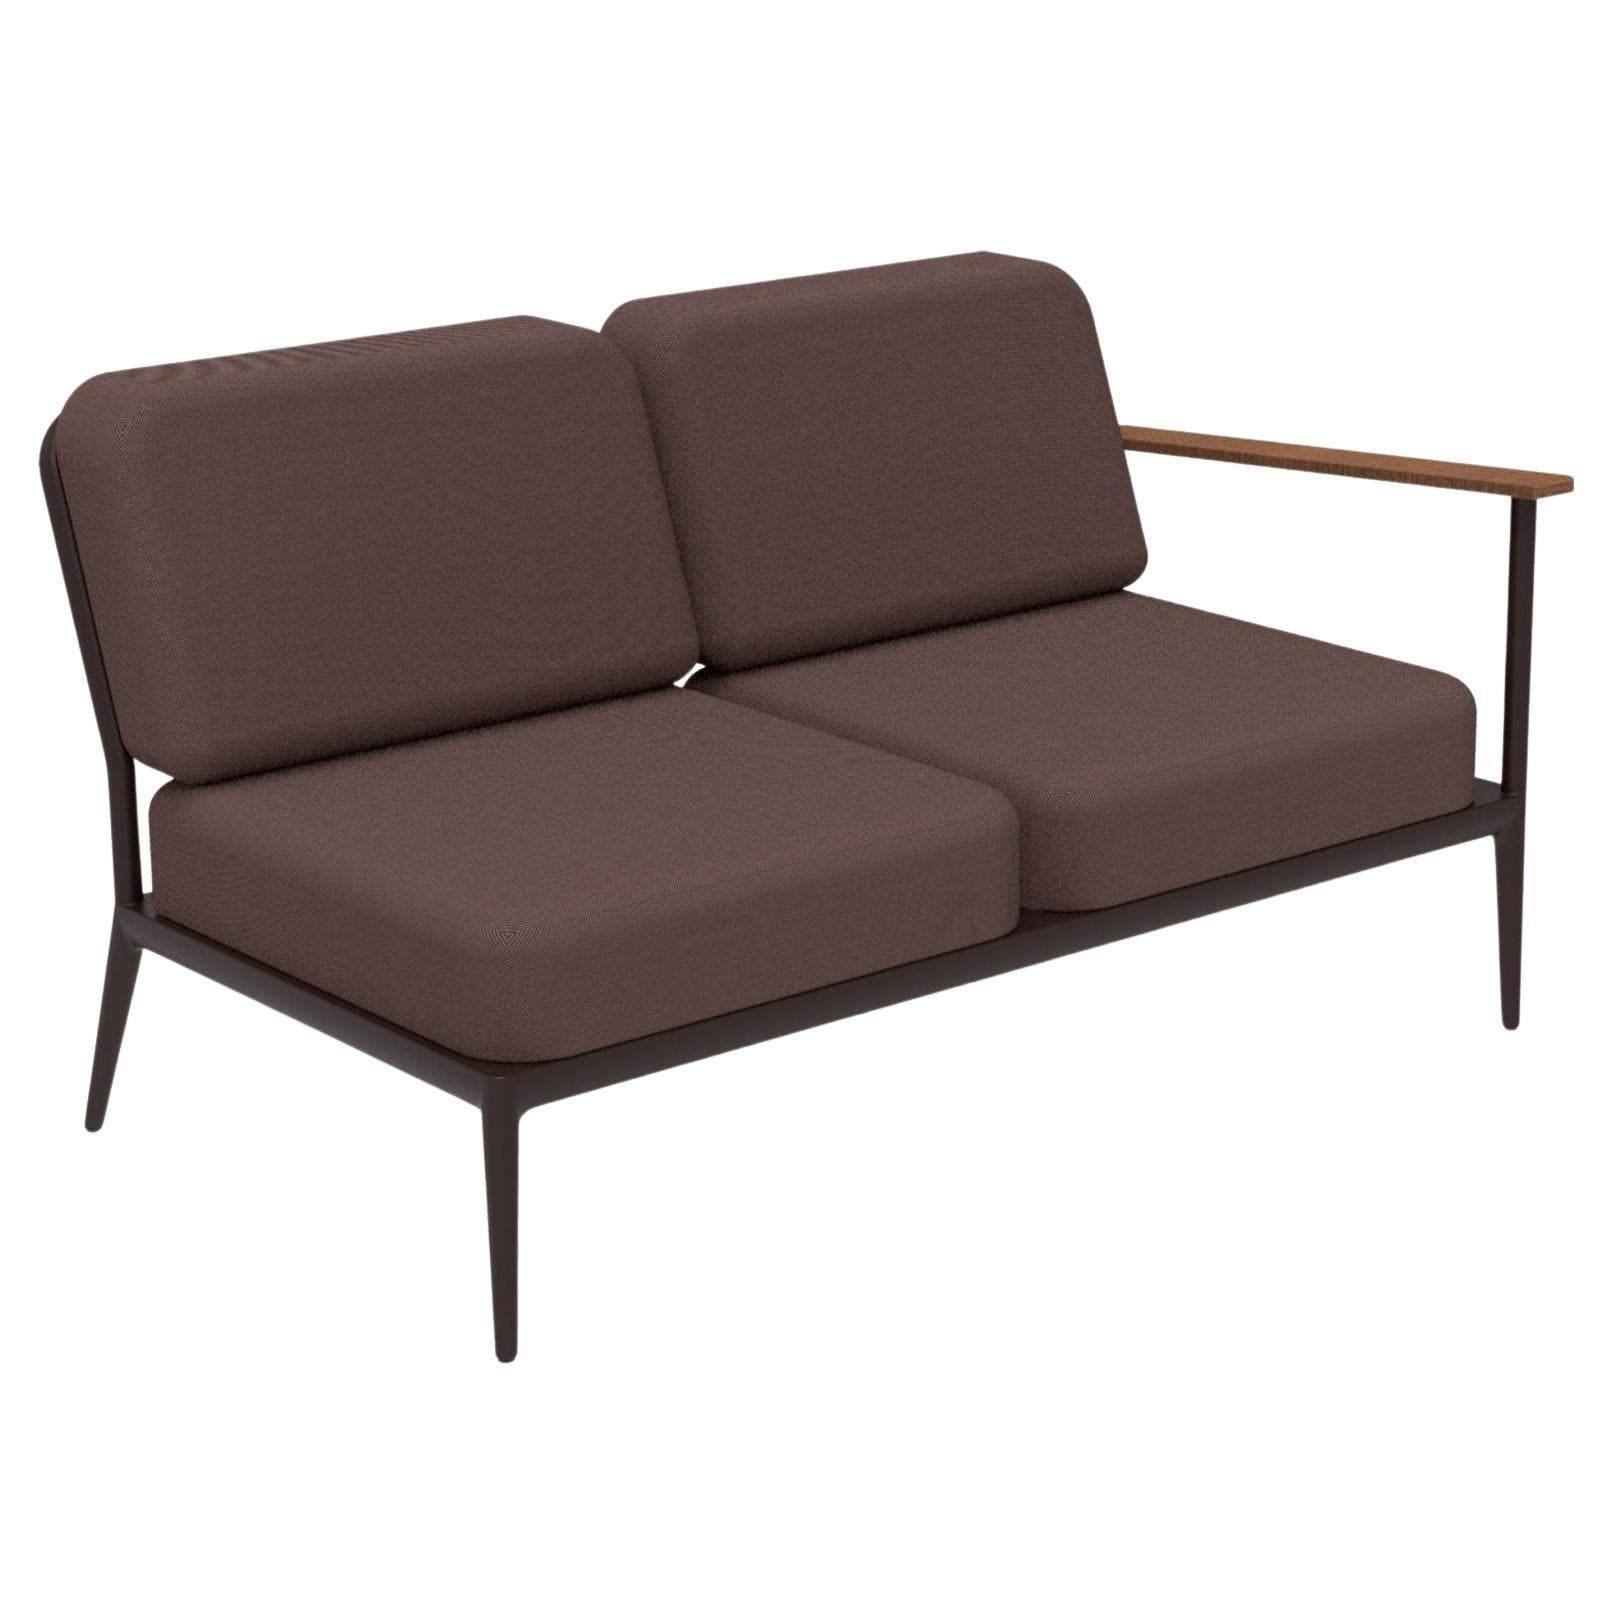 Nature Chocolate Double Left Modular Sofa by MOWEE